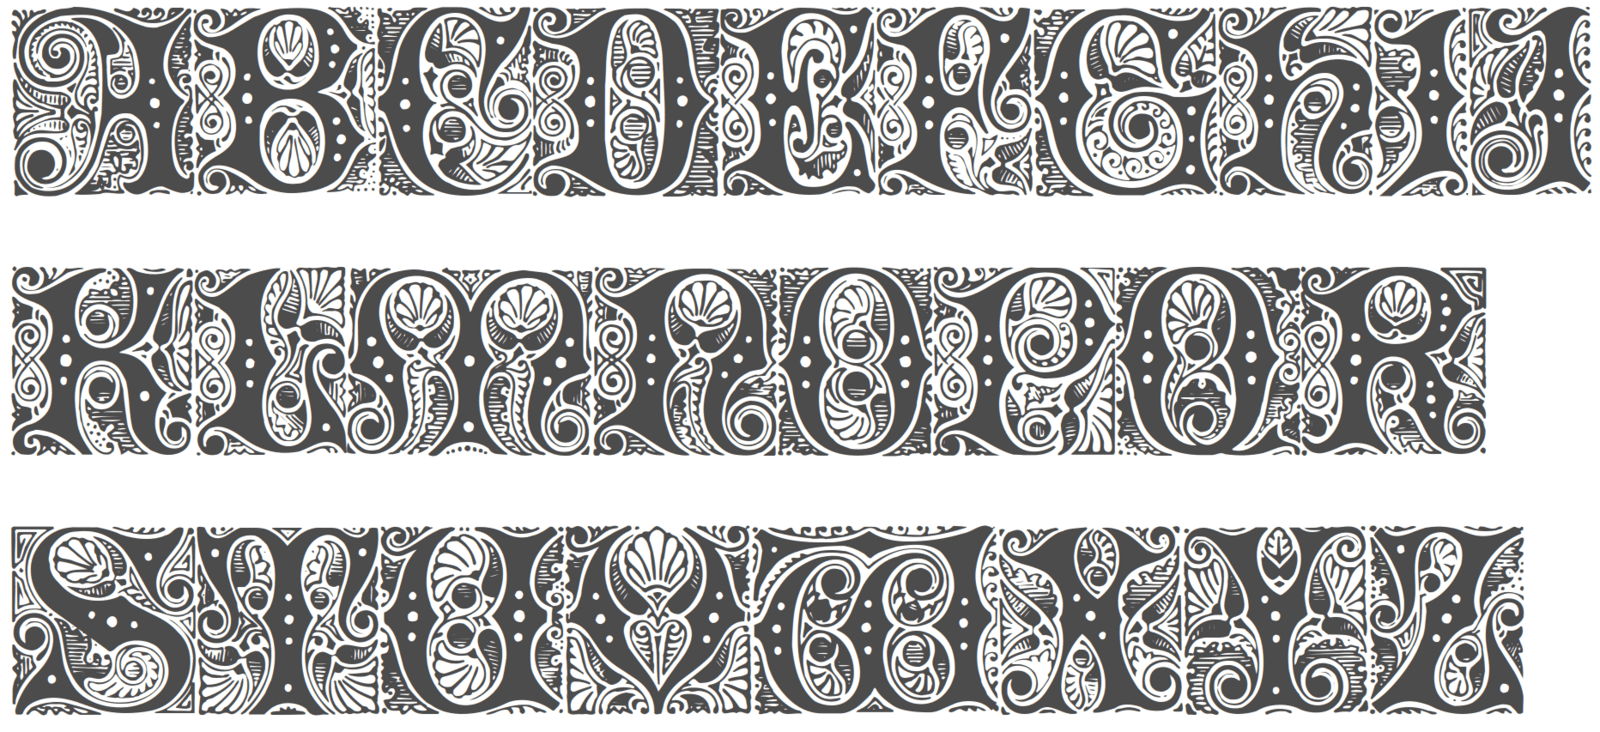 Cheshire Initials (test) is a swirly Art Deco-esque font.